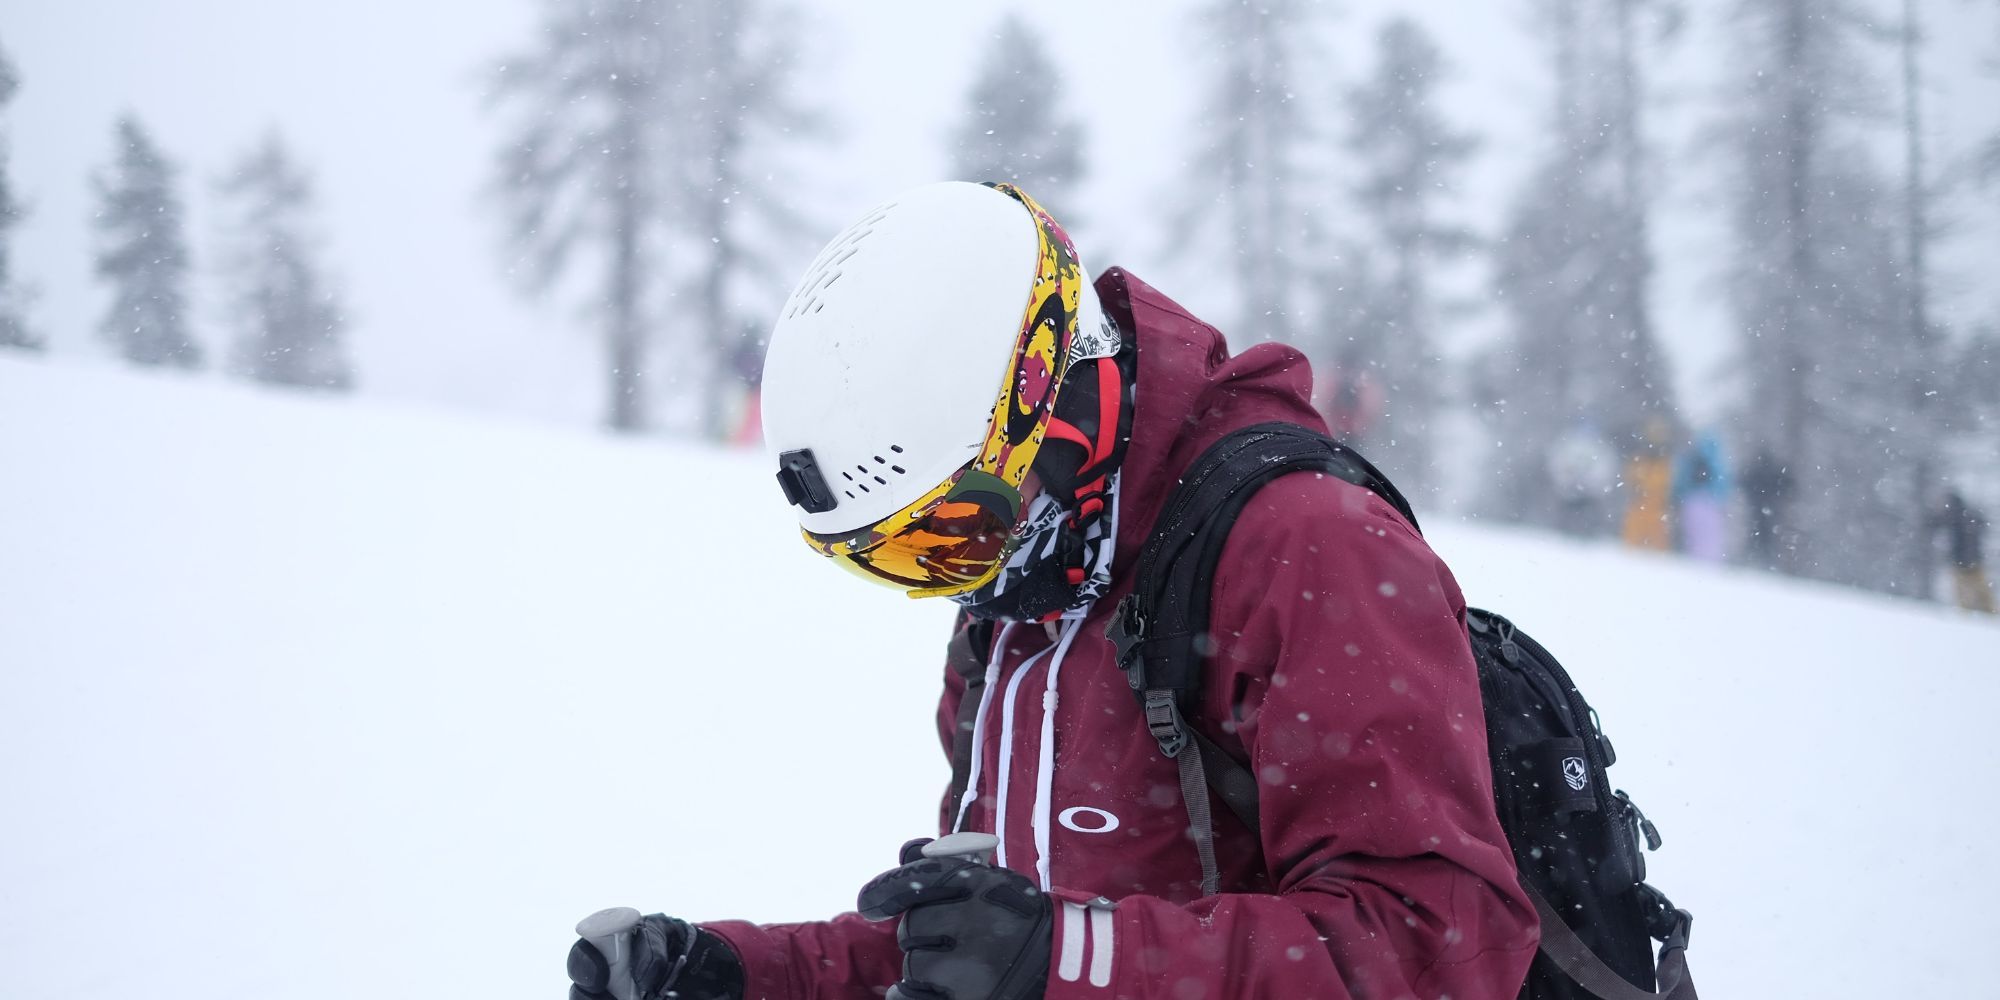 Is there a difference between a snowboard and ski helmet?